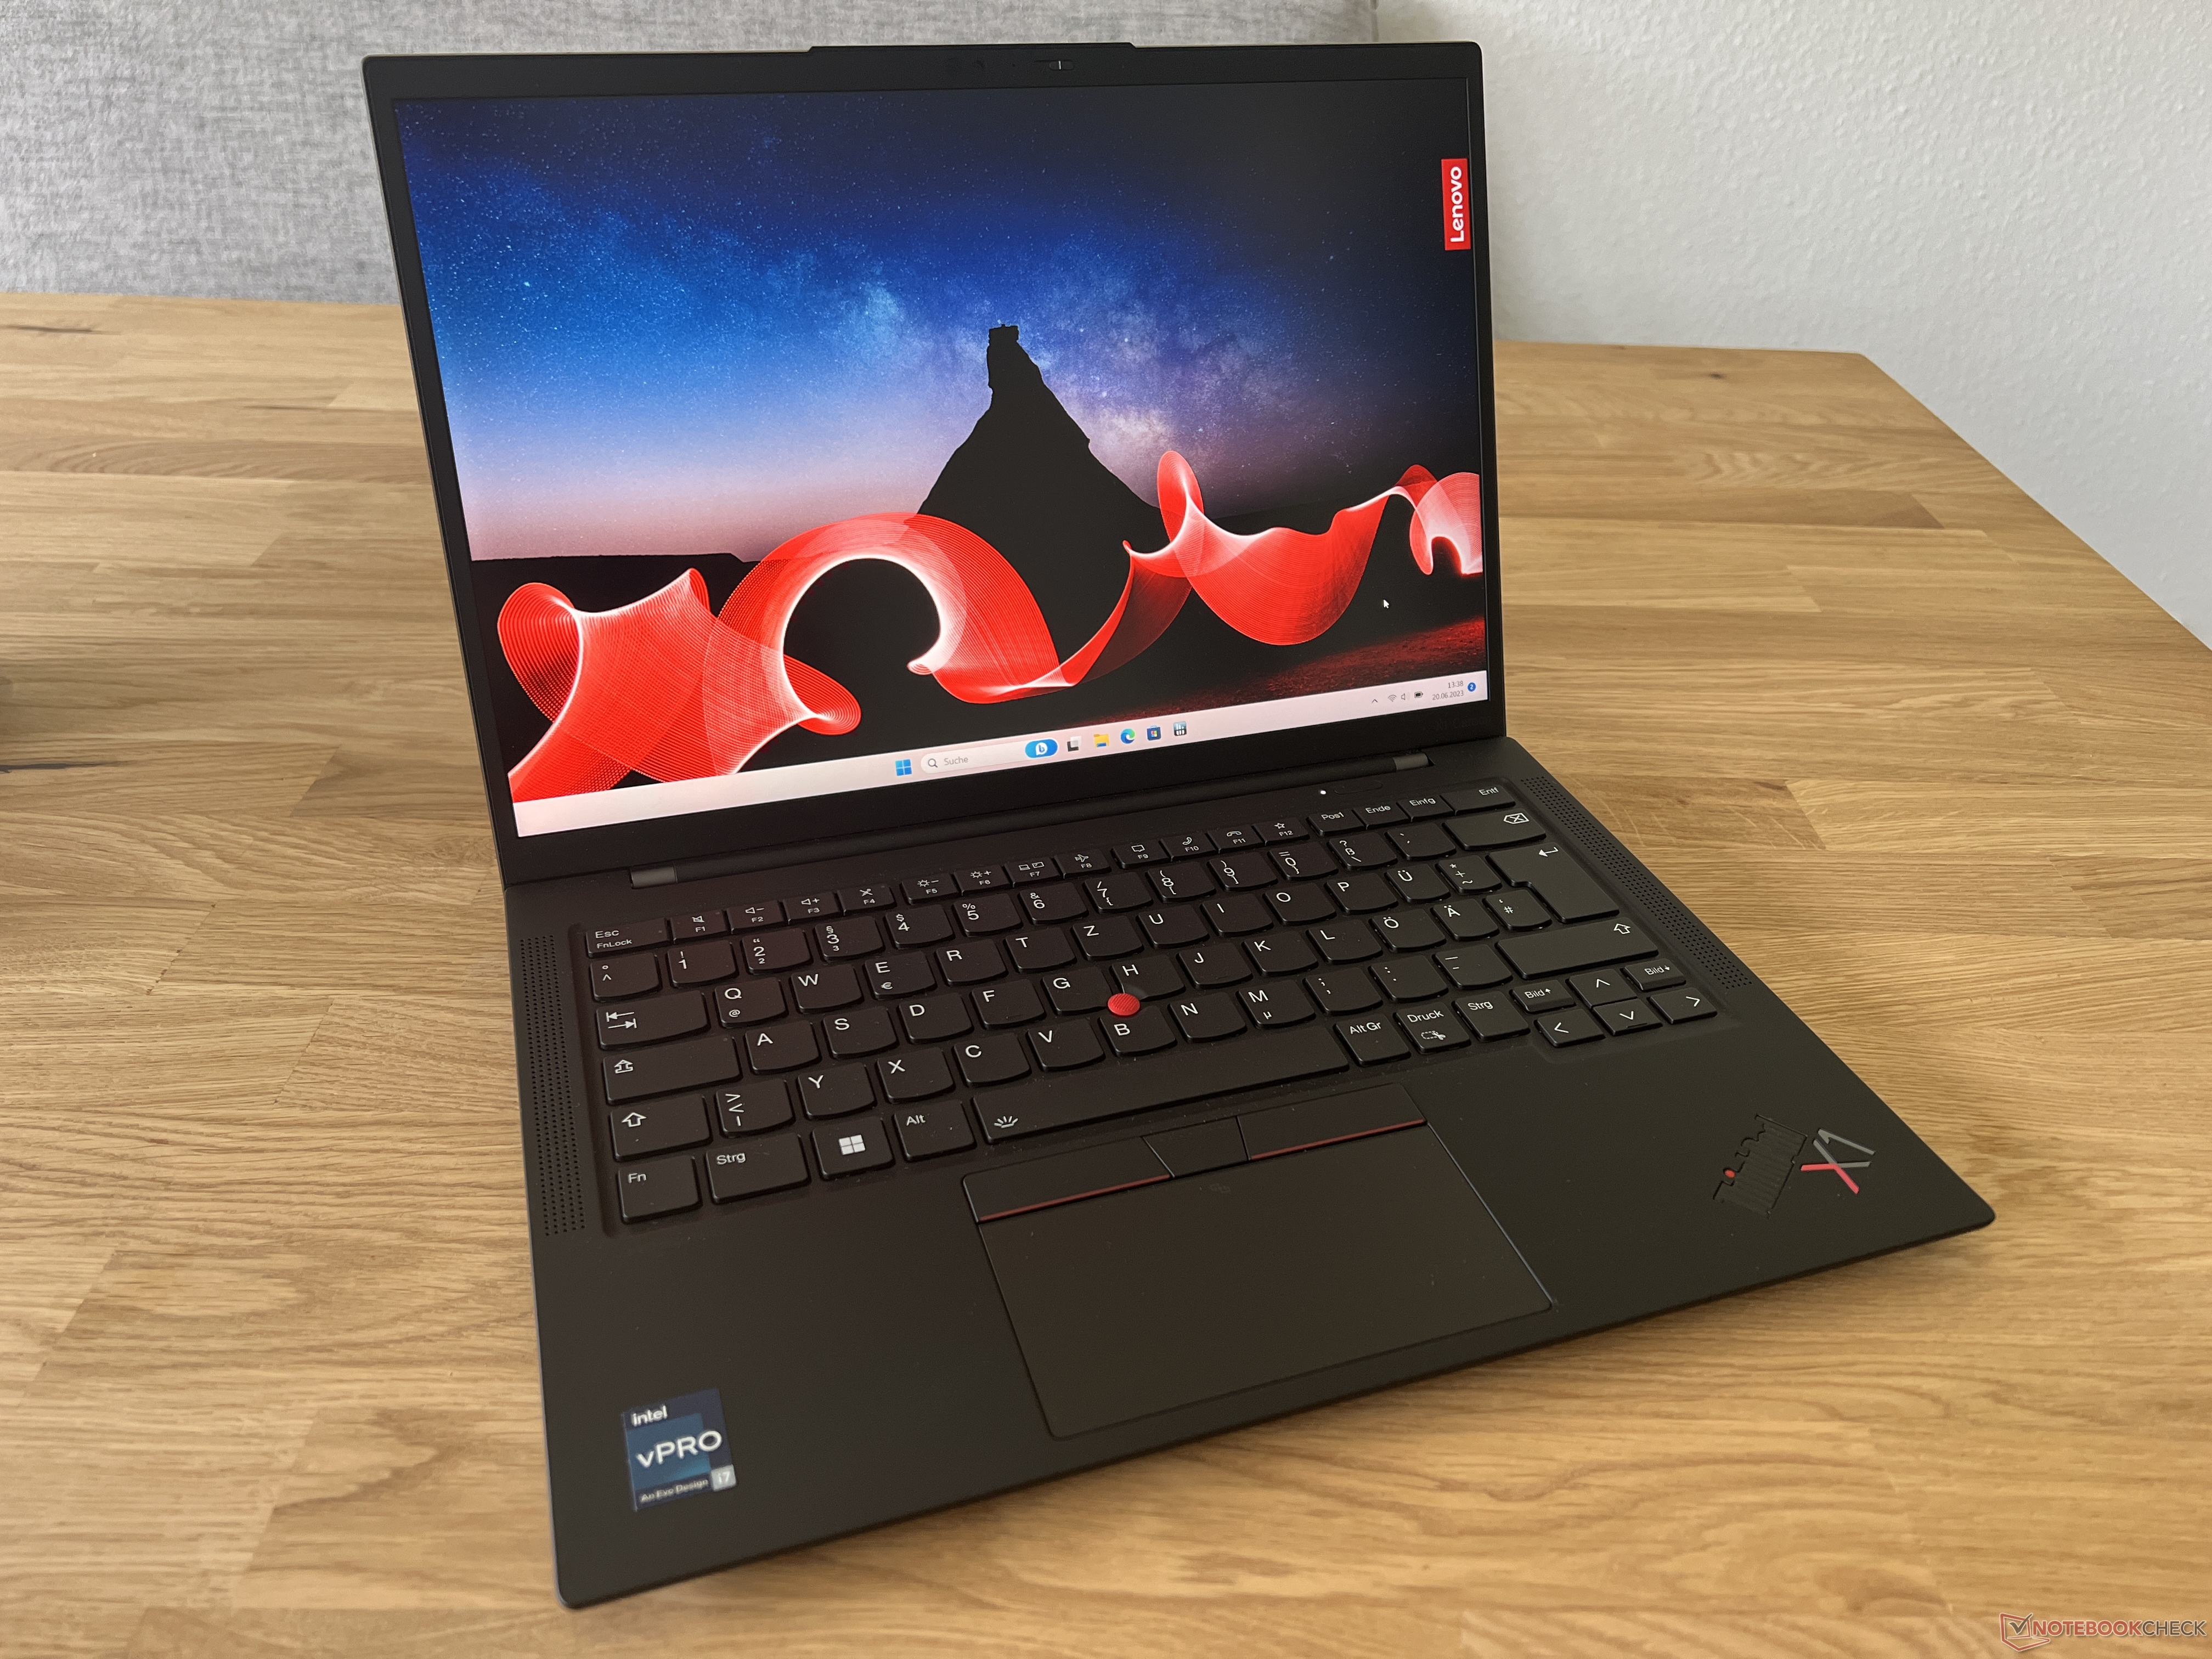 Lenovo ThinkPad X1 Carbon G11 review - The stagnating, expensive business flagship - NotebookCheck.net Reviews